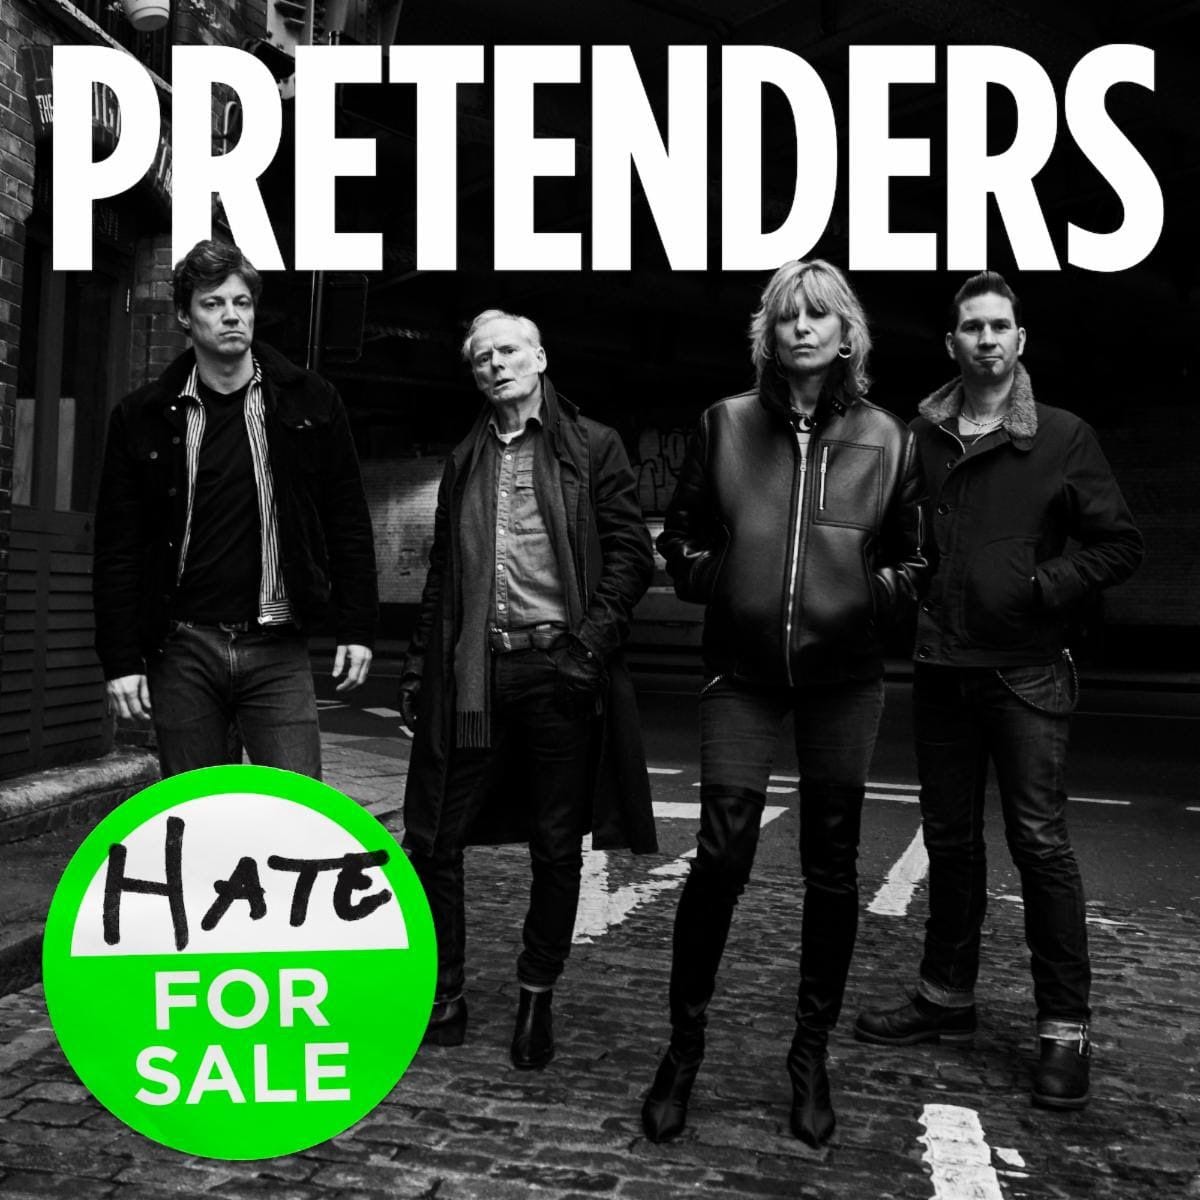 The Pretenders’ ‘Hate for Sale’ Maintains a Formidability That Rejects Compromise